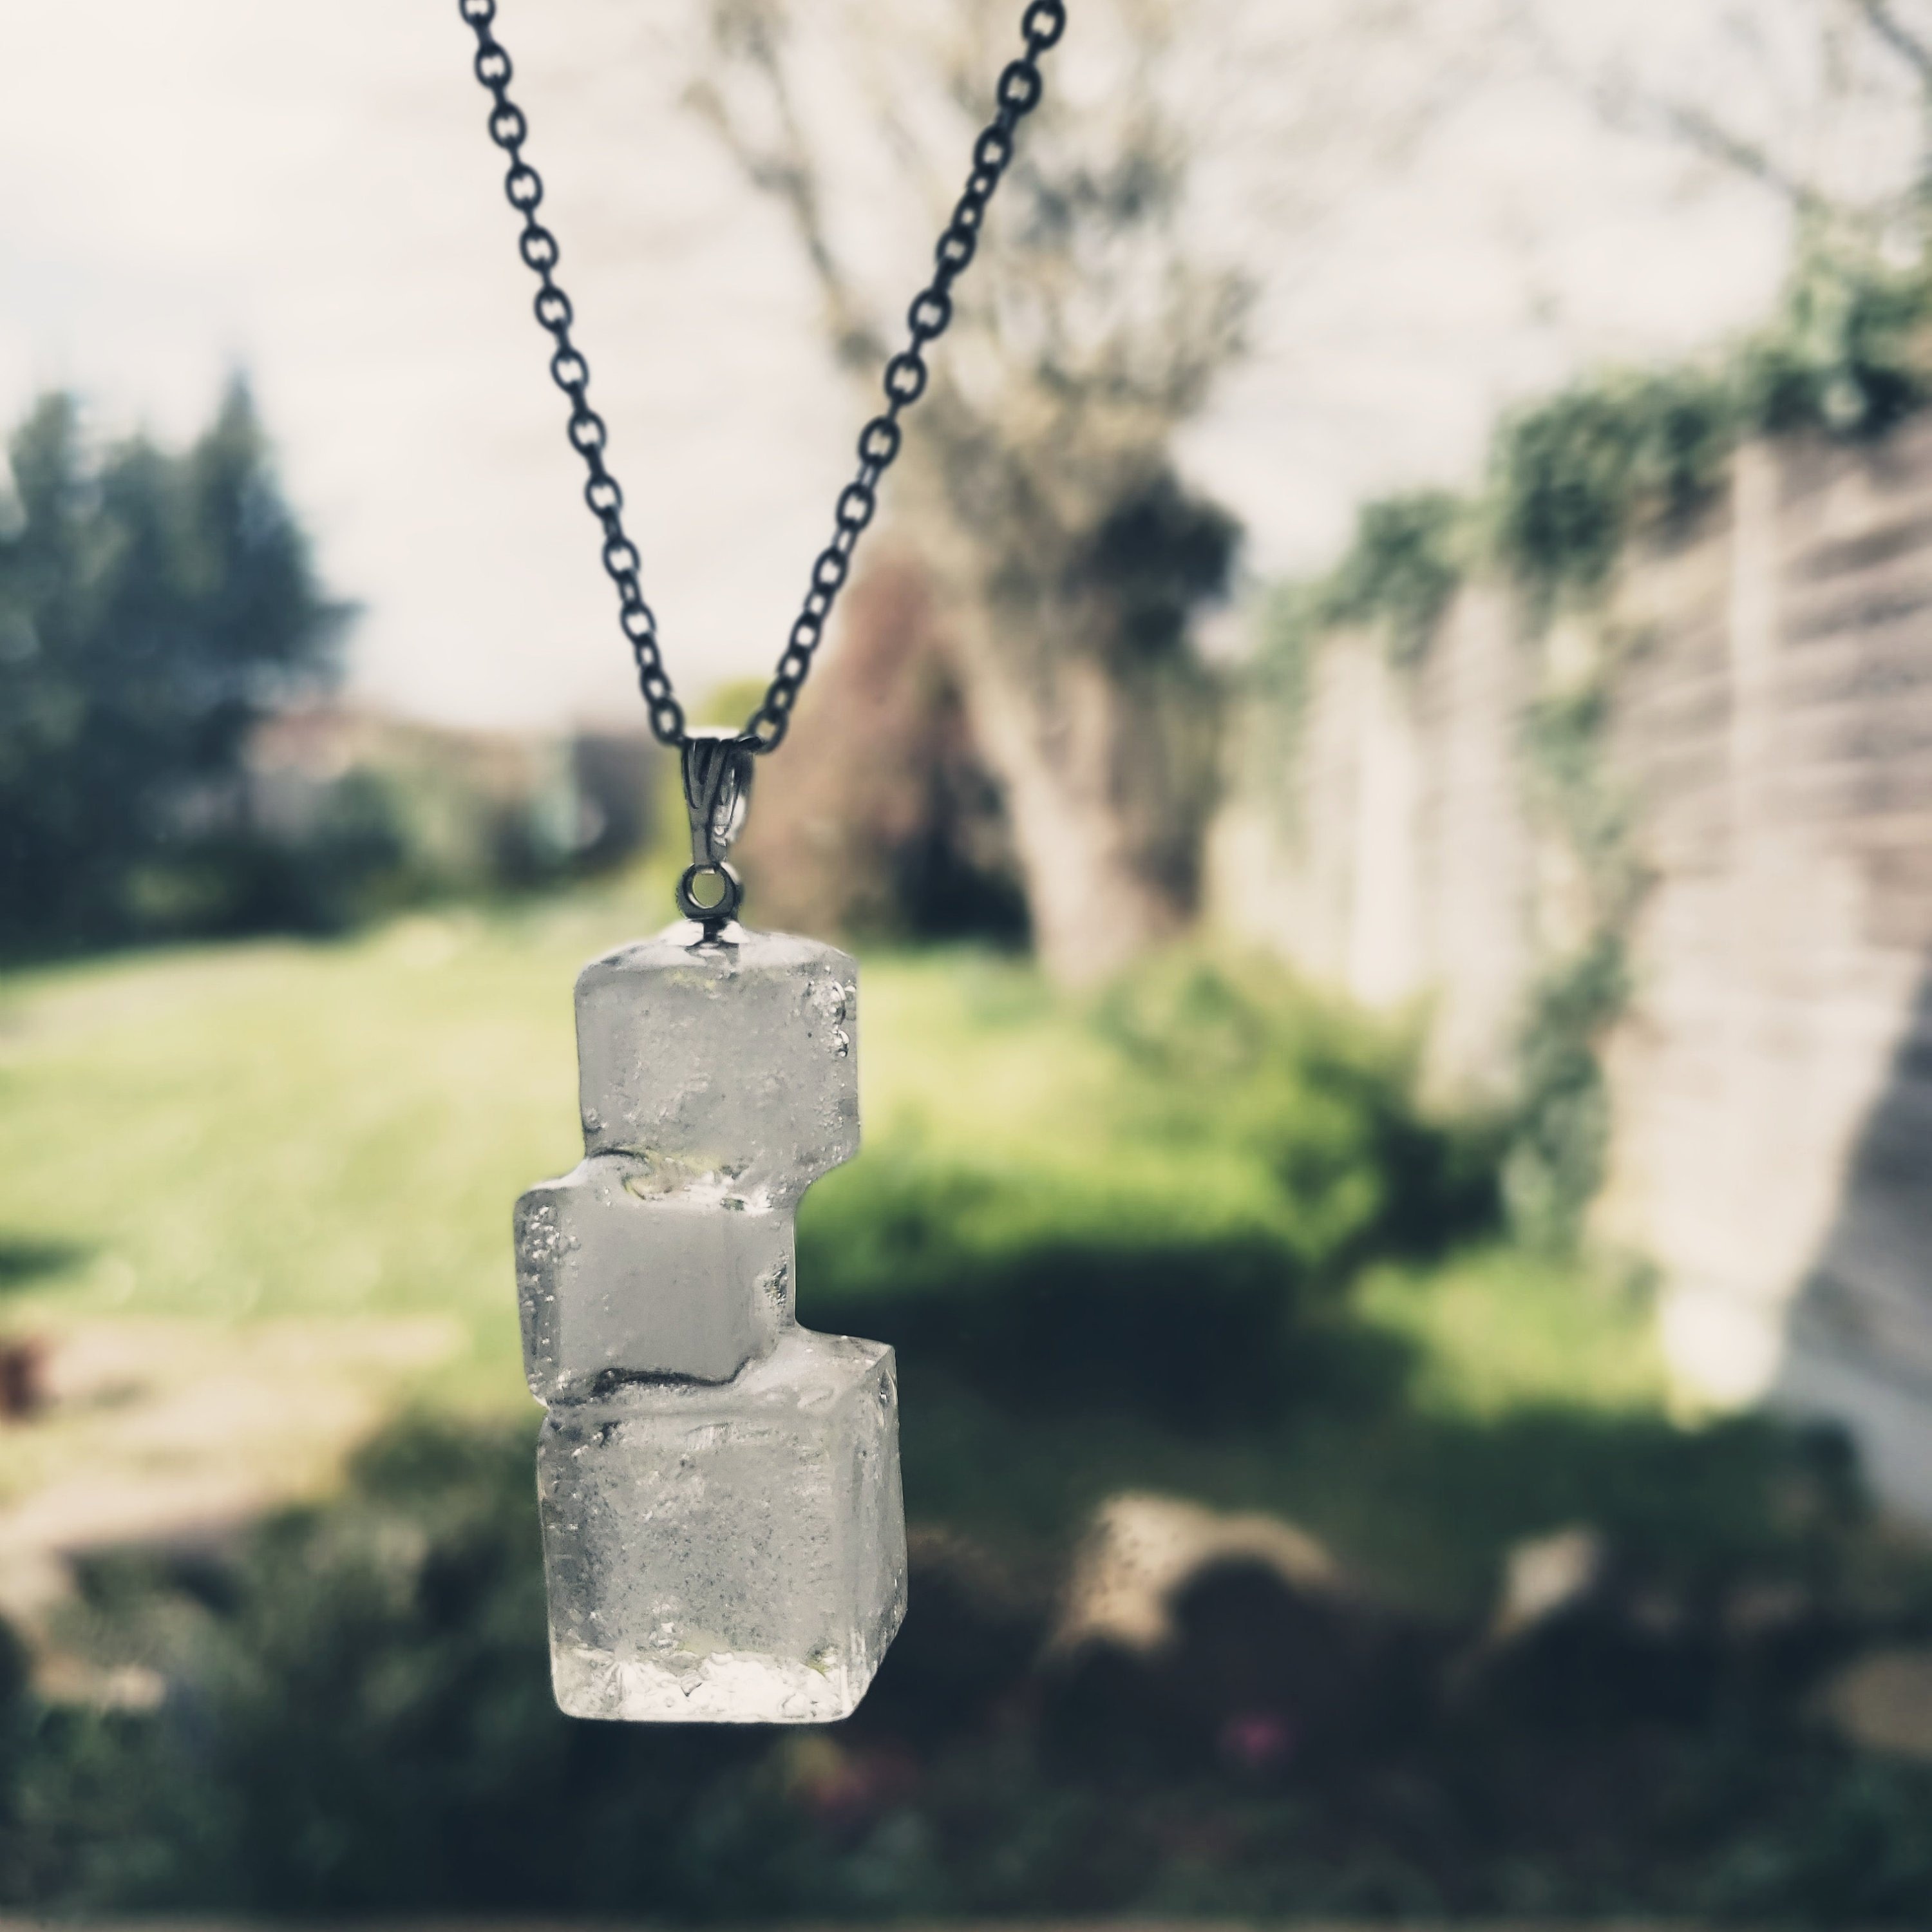 925 Sterling Silver Crystal Necklace With Sugar Cube Pendant Fashionable  Icebox Jewelry Accessory HG12 From Timelesszeng2, $5.64 | DHgate.Com